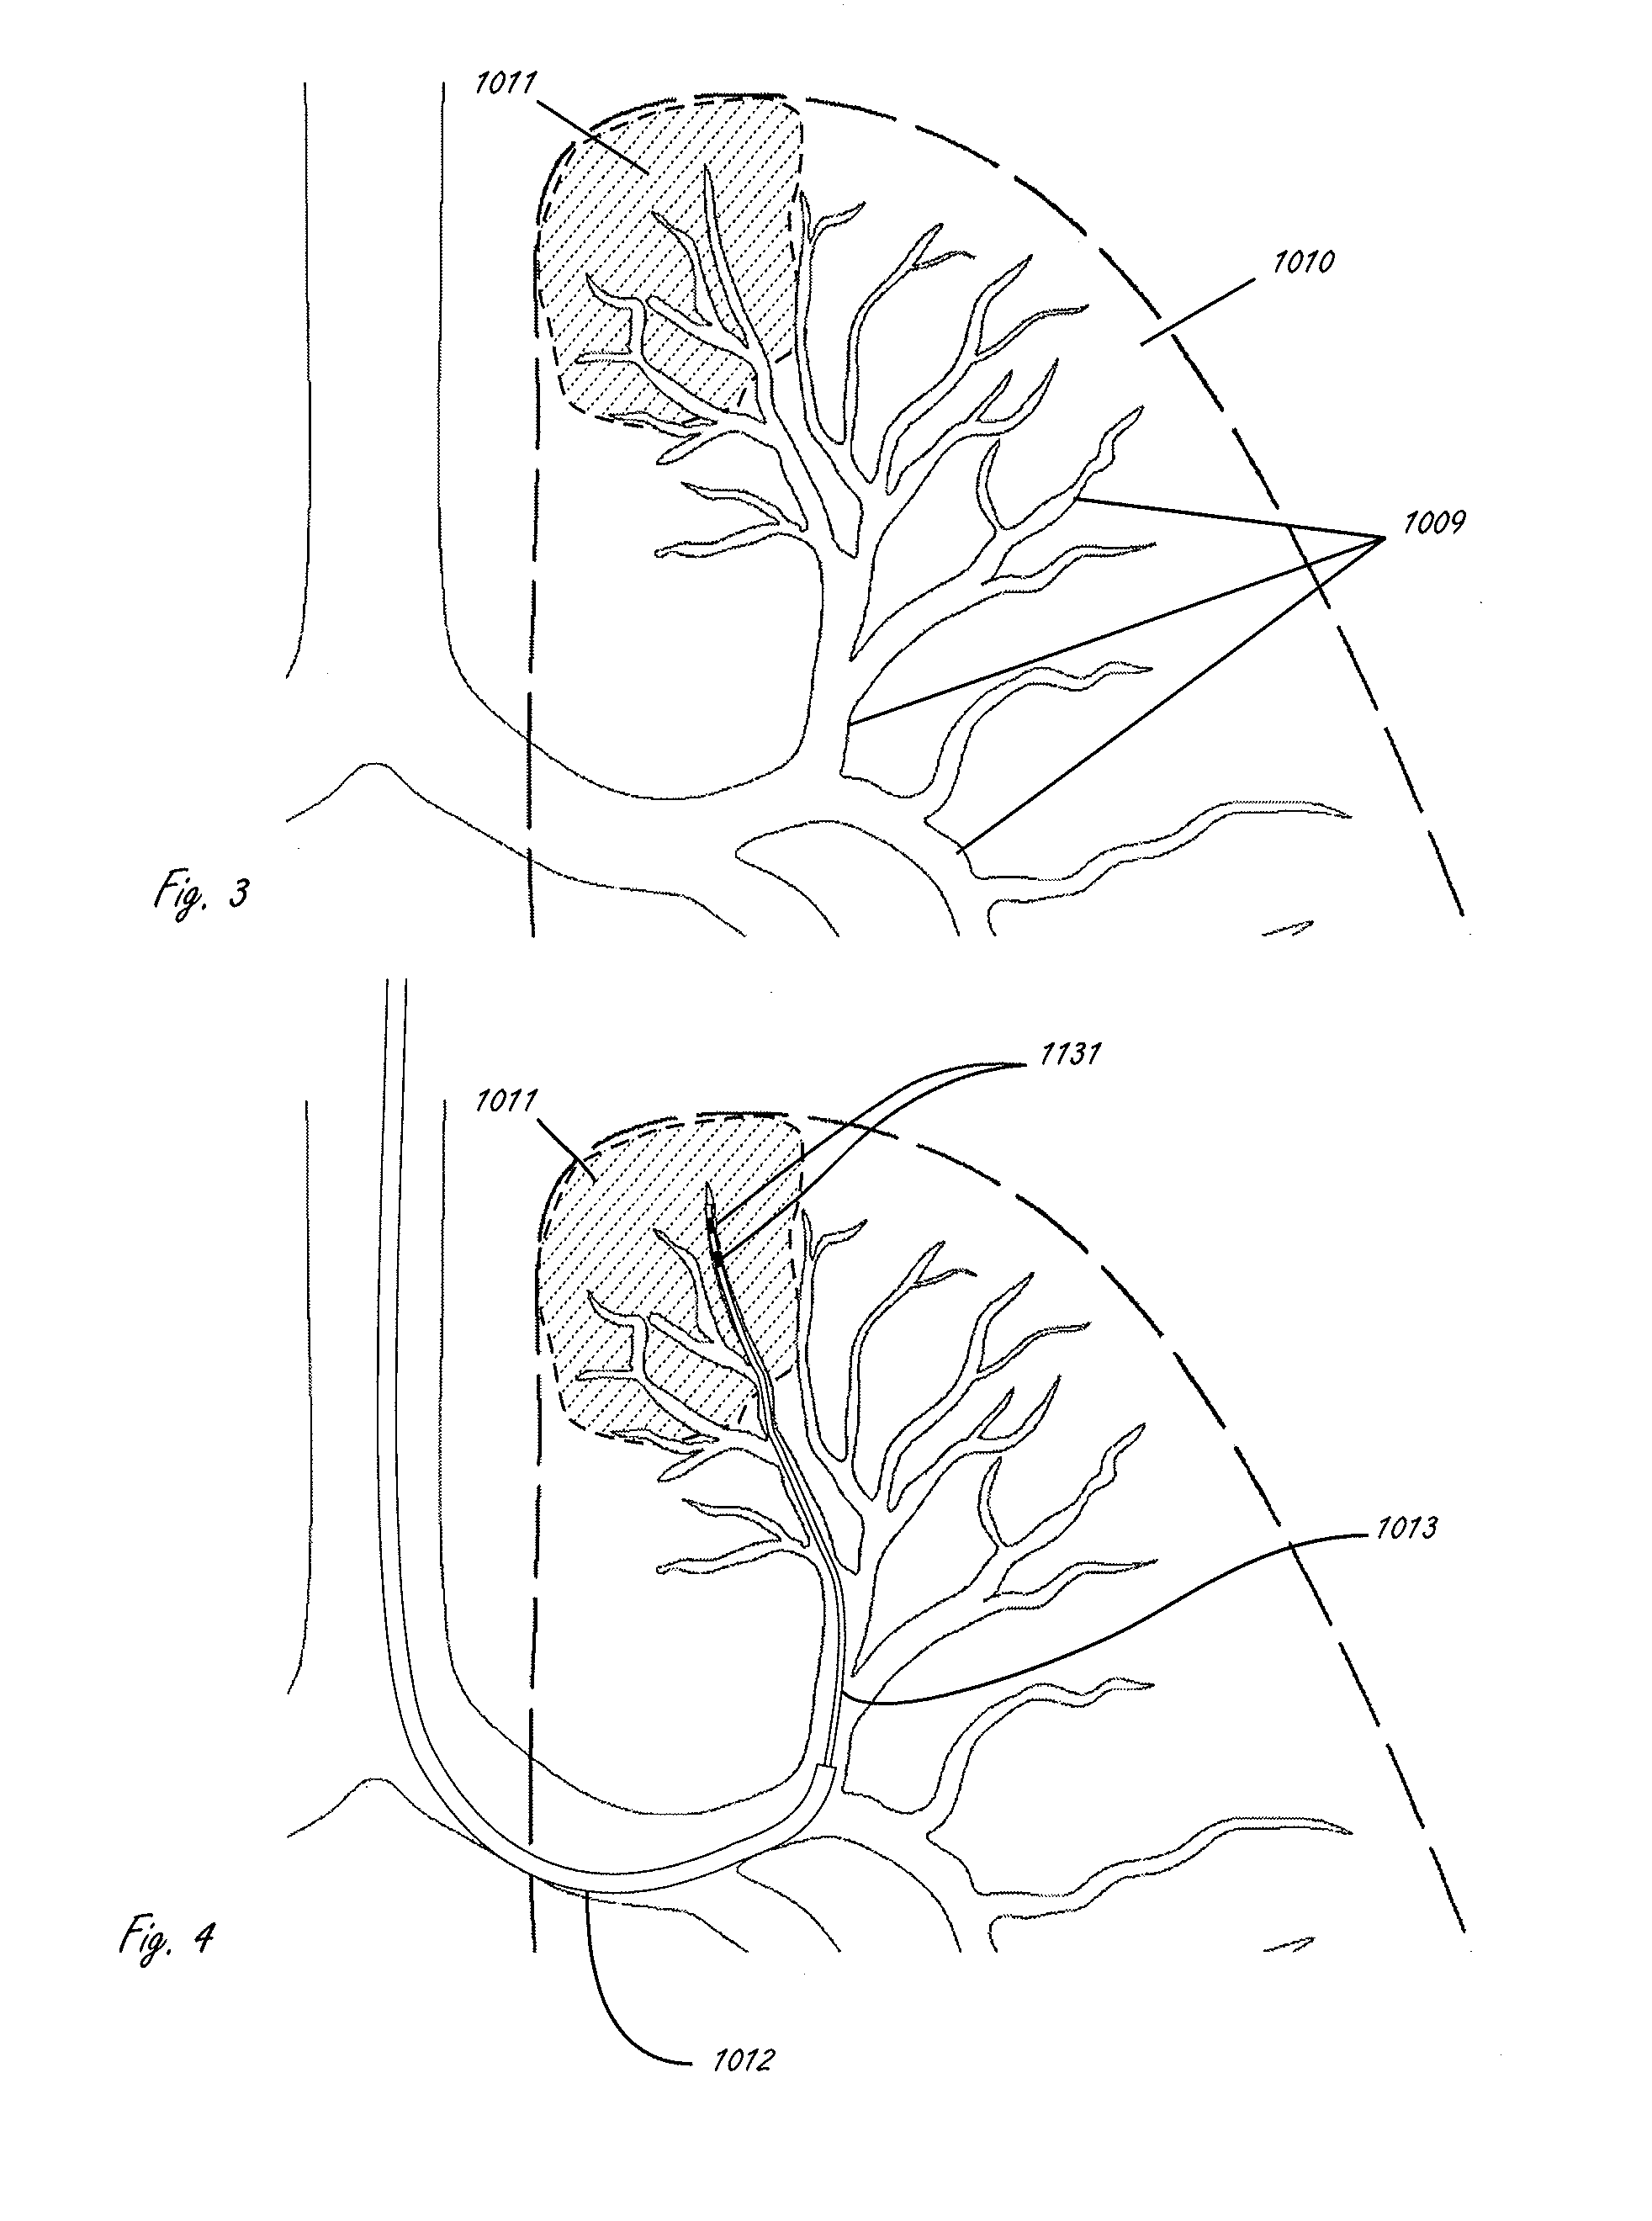 Devices and methods for lung volume reduction